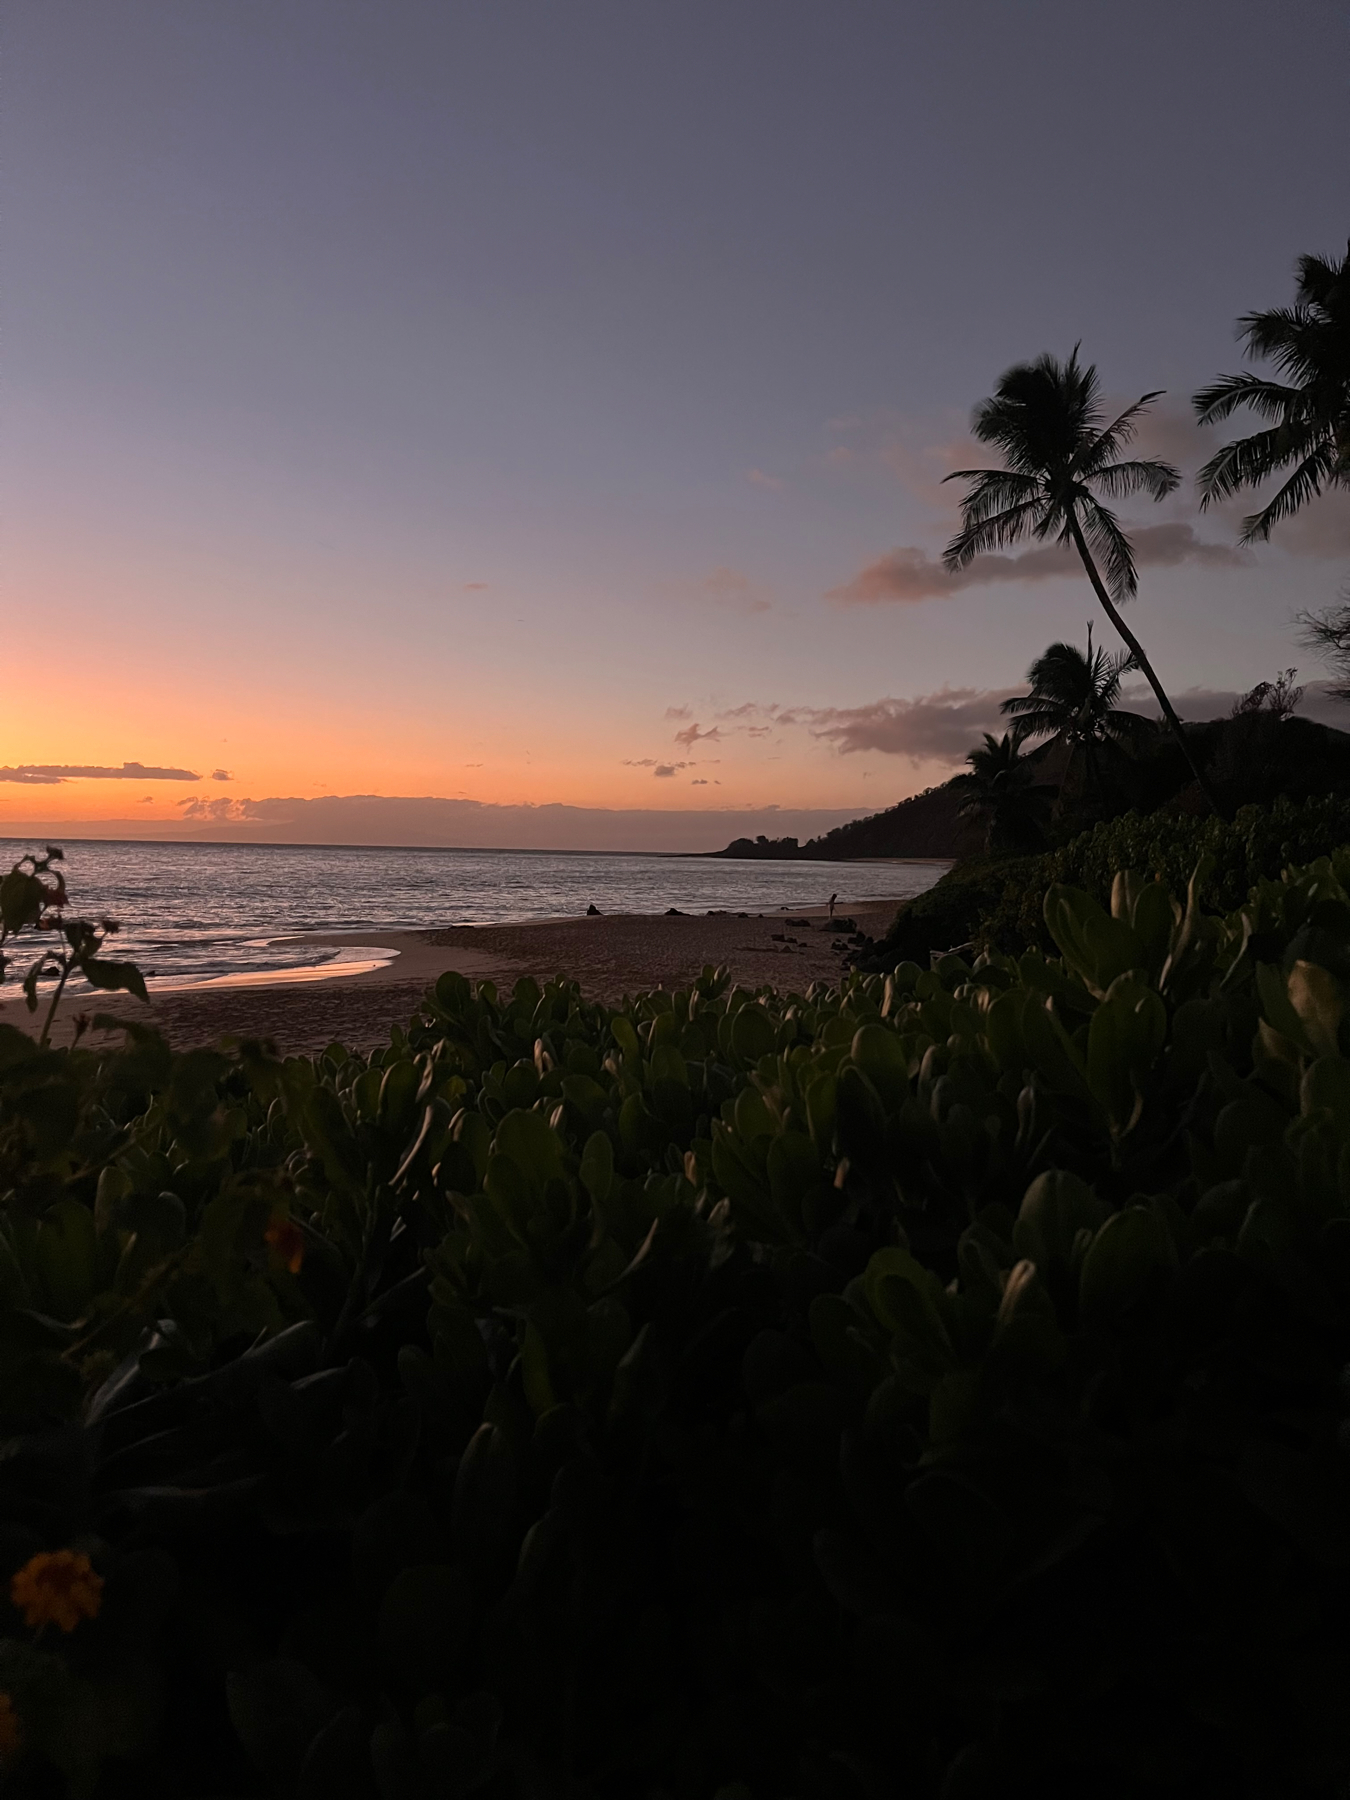 Sunset at a beach with silhouettes of palm trees, a colorful sky, and green bush in the foreground.